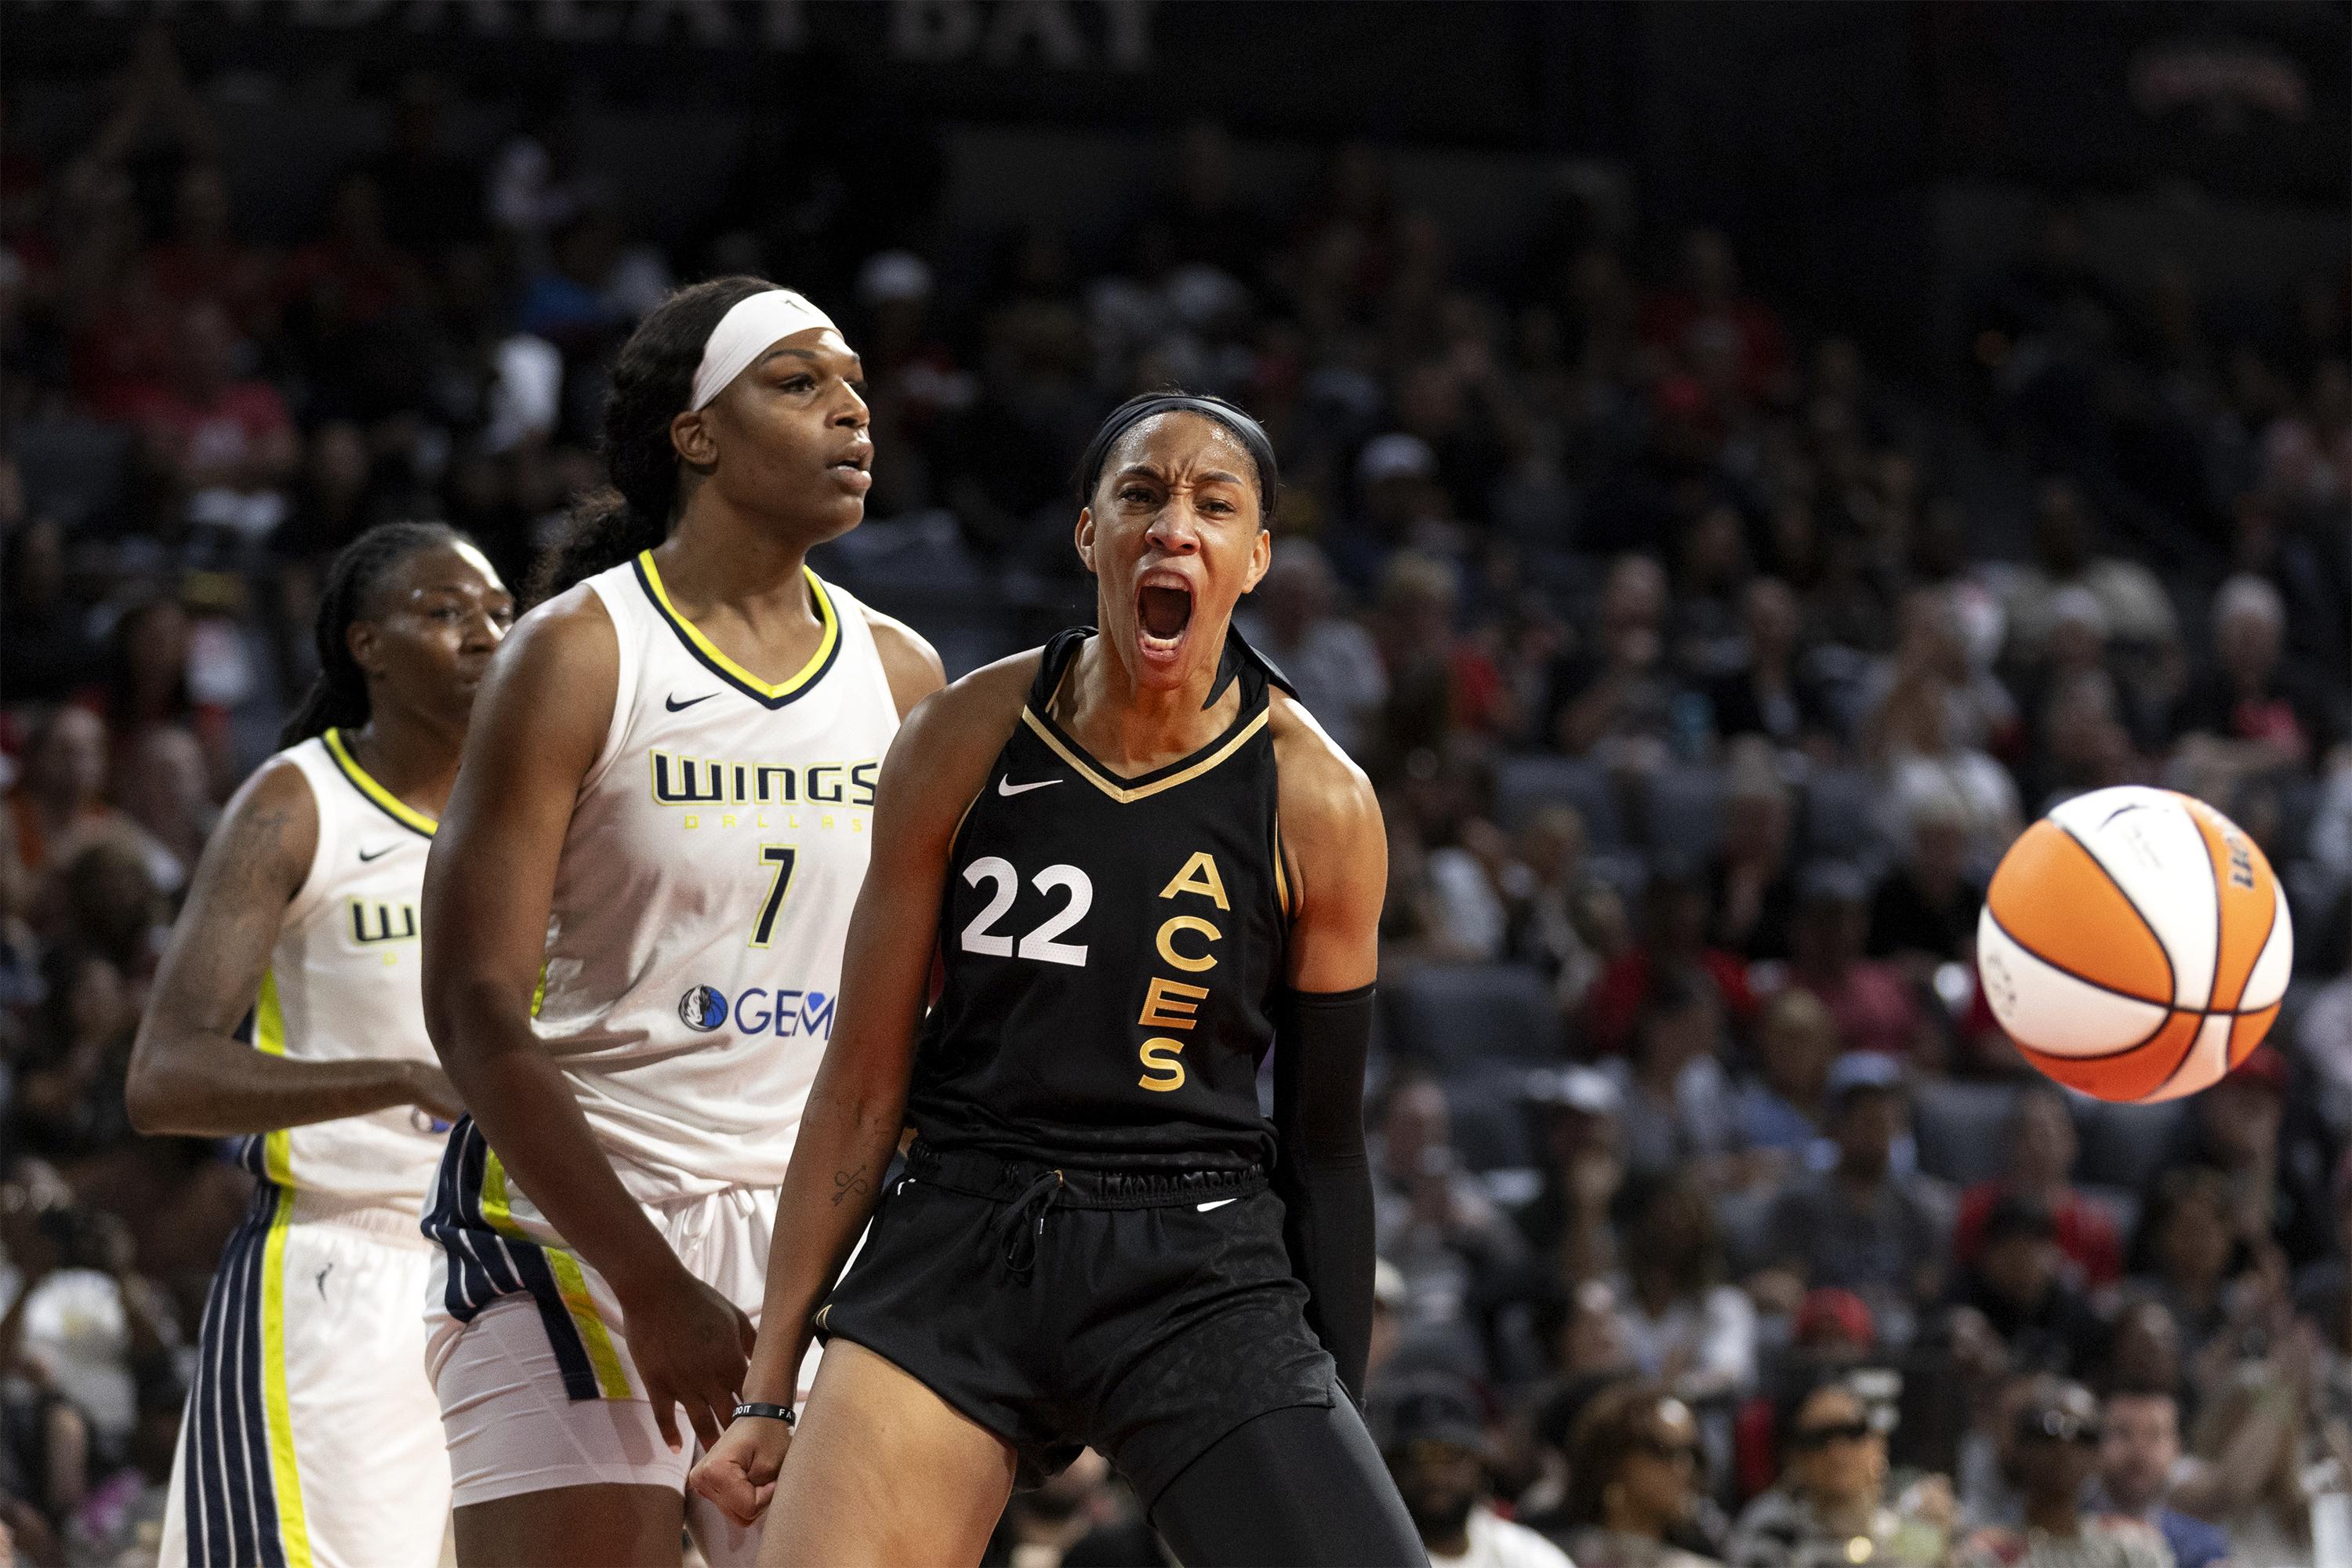 Jones, Stewart lead Liberty past Aces to avoid sweep in WNBA Finals